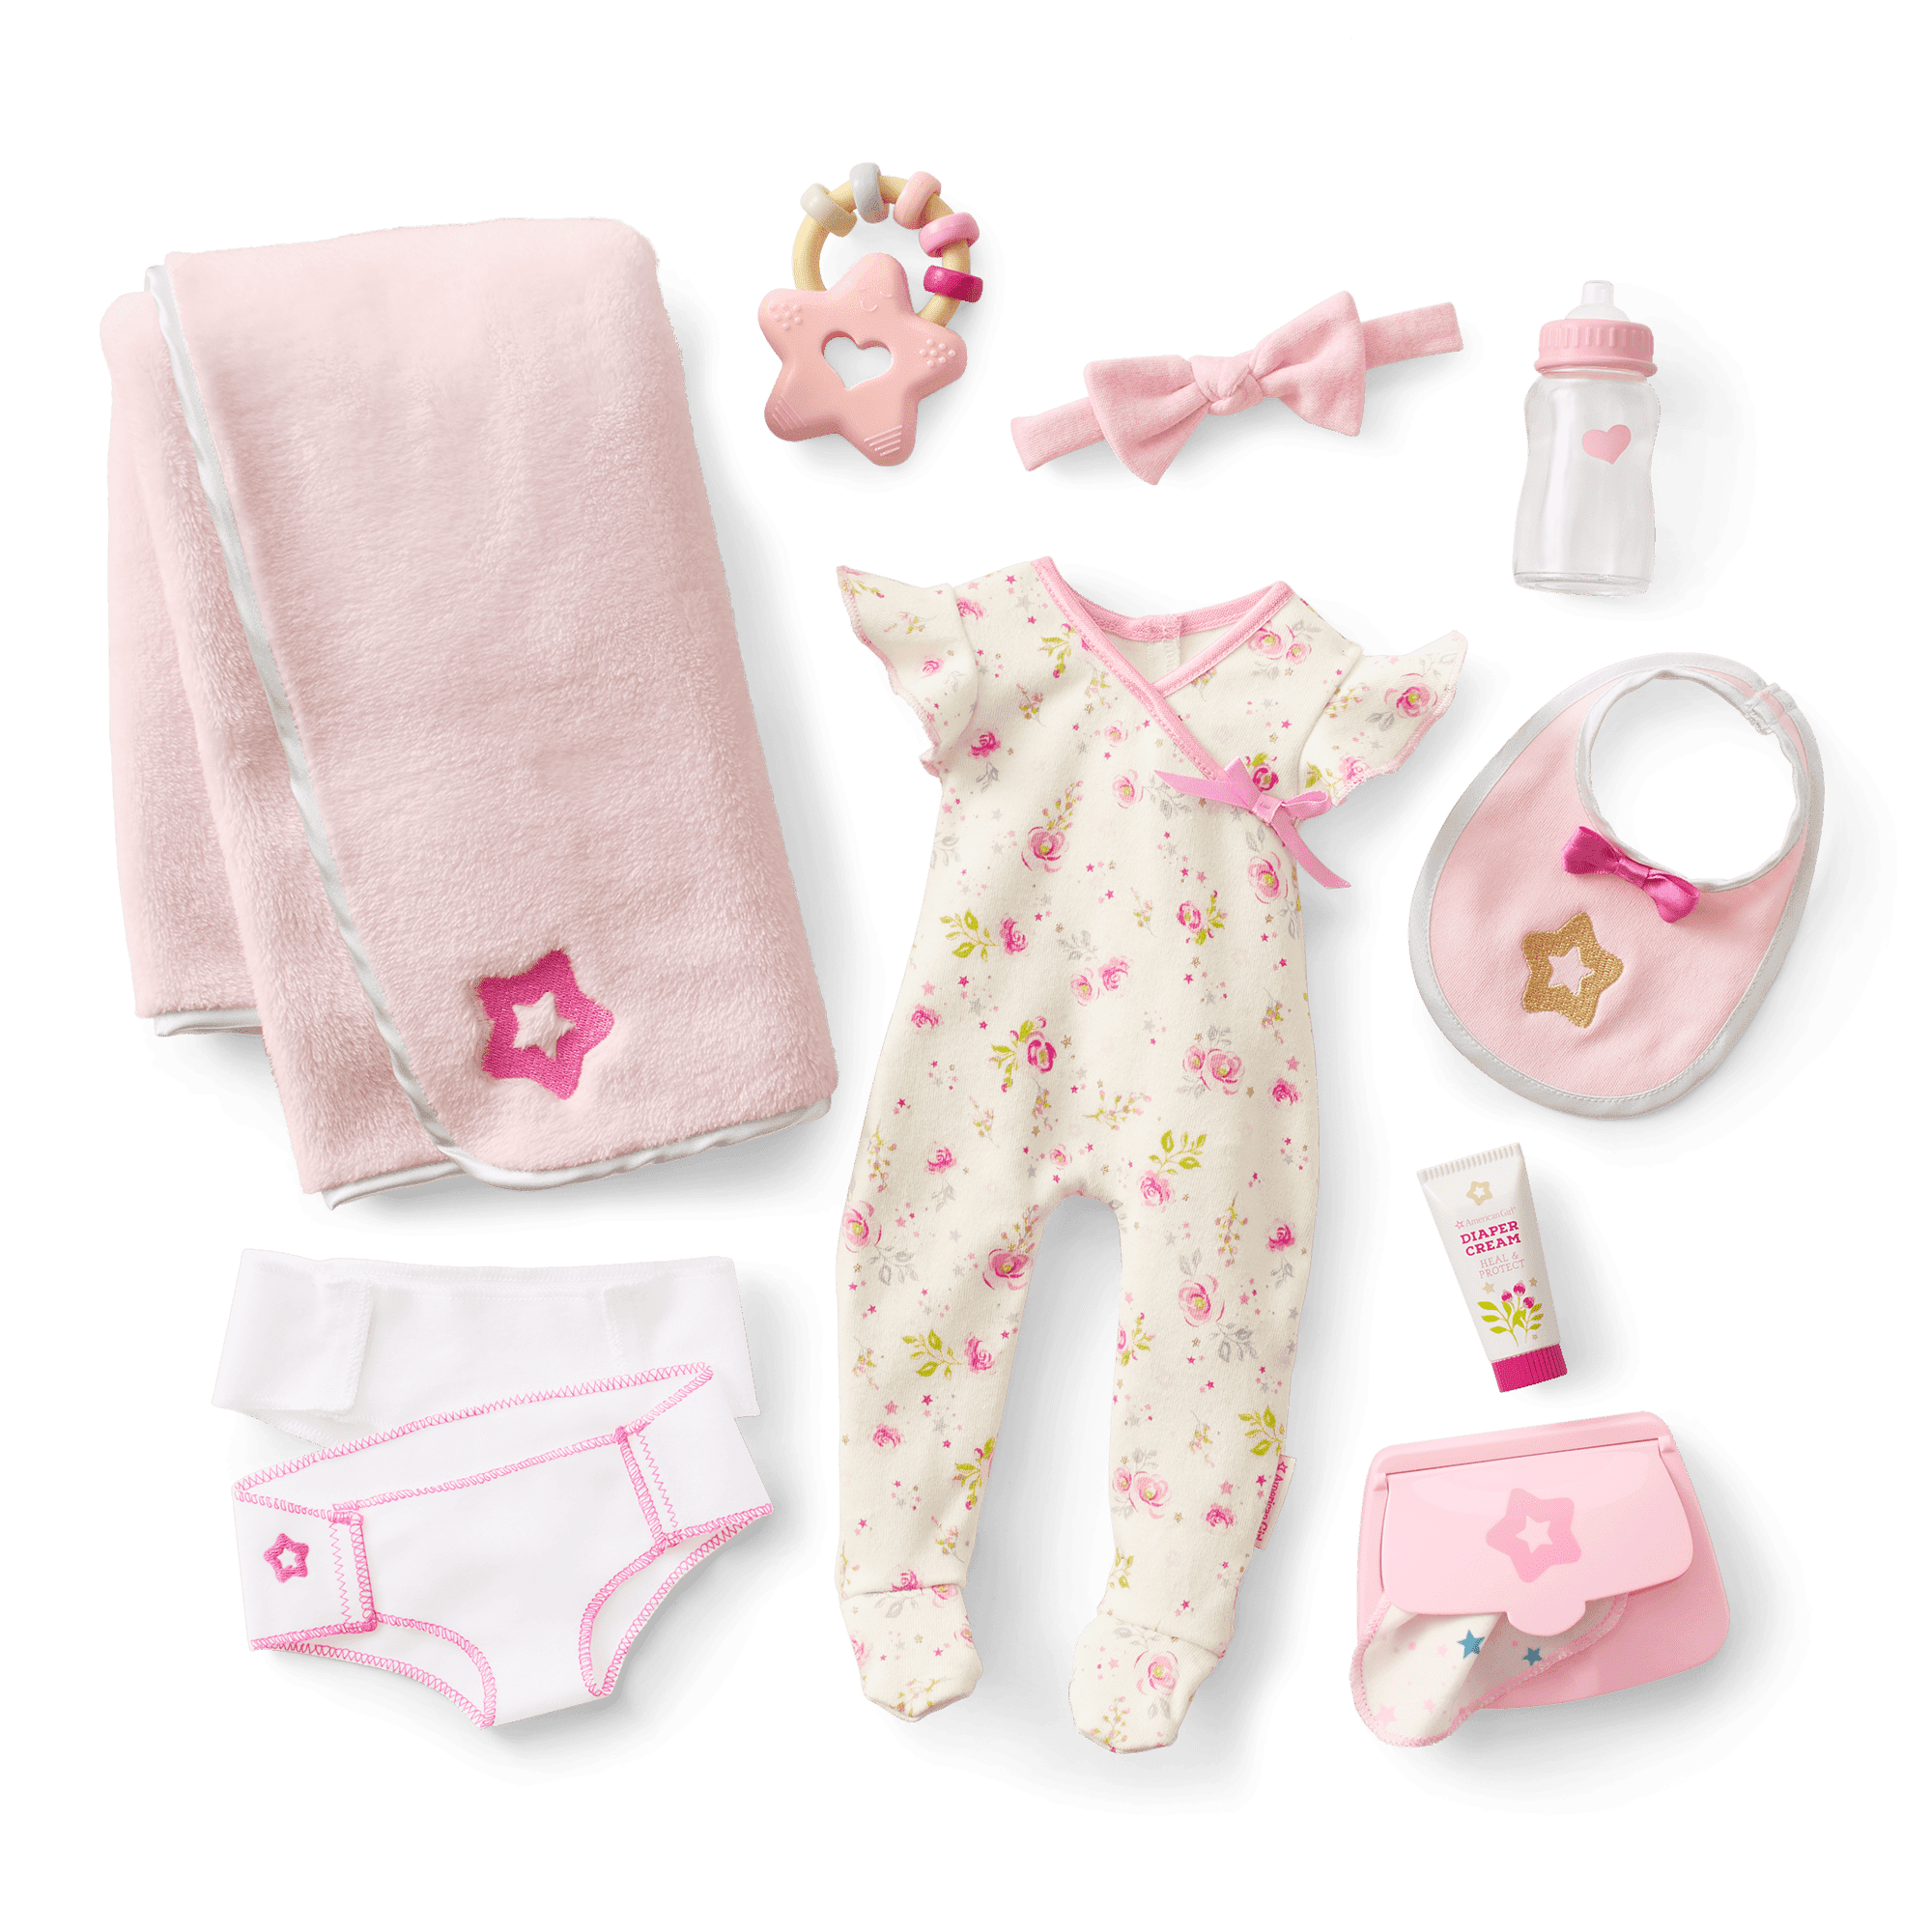 Bitty Baby® Doll #2 Care & Play Set